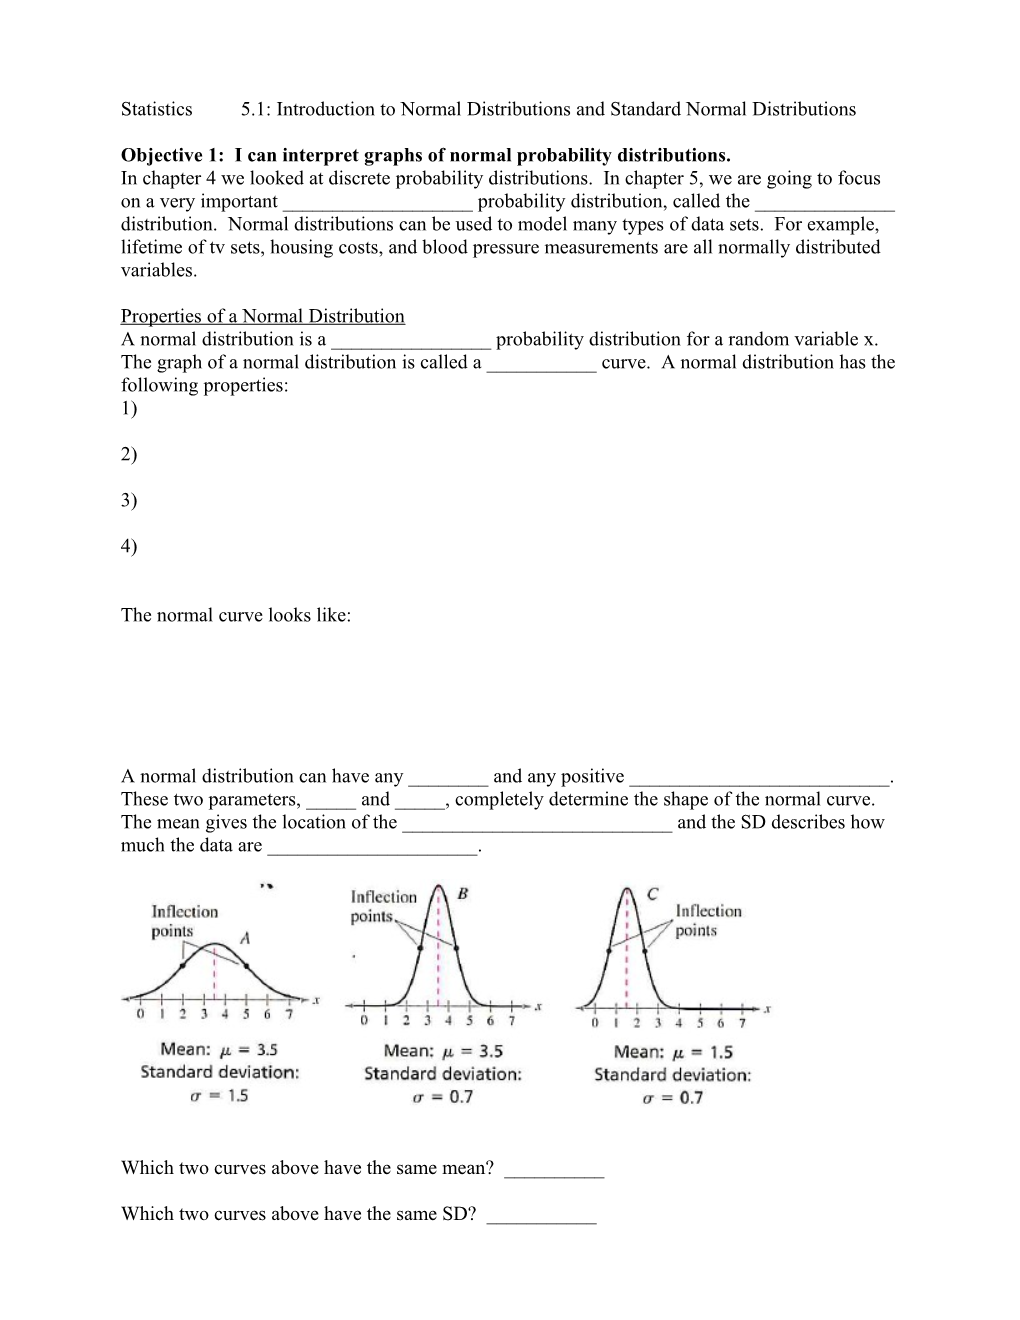 Objective 1: I Can Interpret Graphs of Normal Probability Distributions